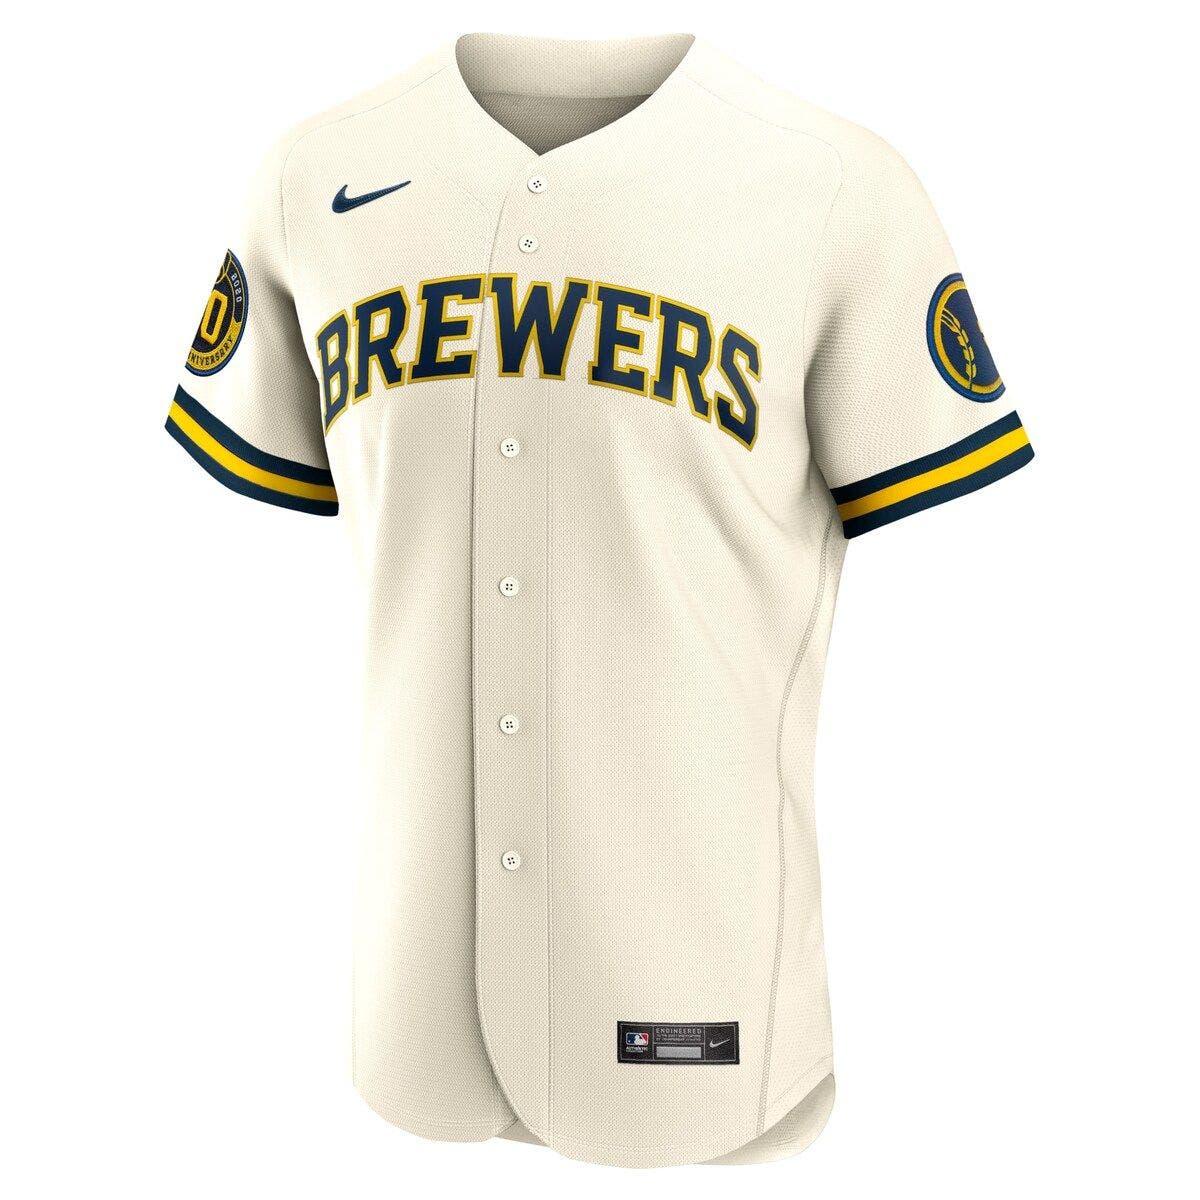 Nike Men's Powder Blue Milwaukee Brewers Road Cooperstown Collection Team  Jersey - Macy's